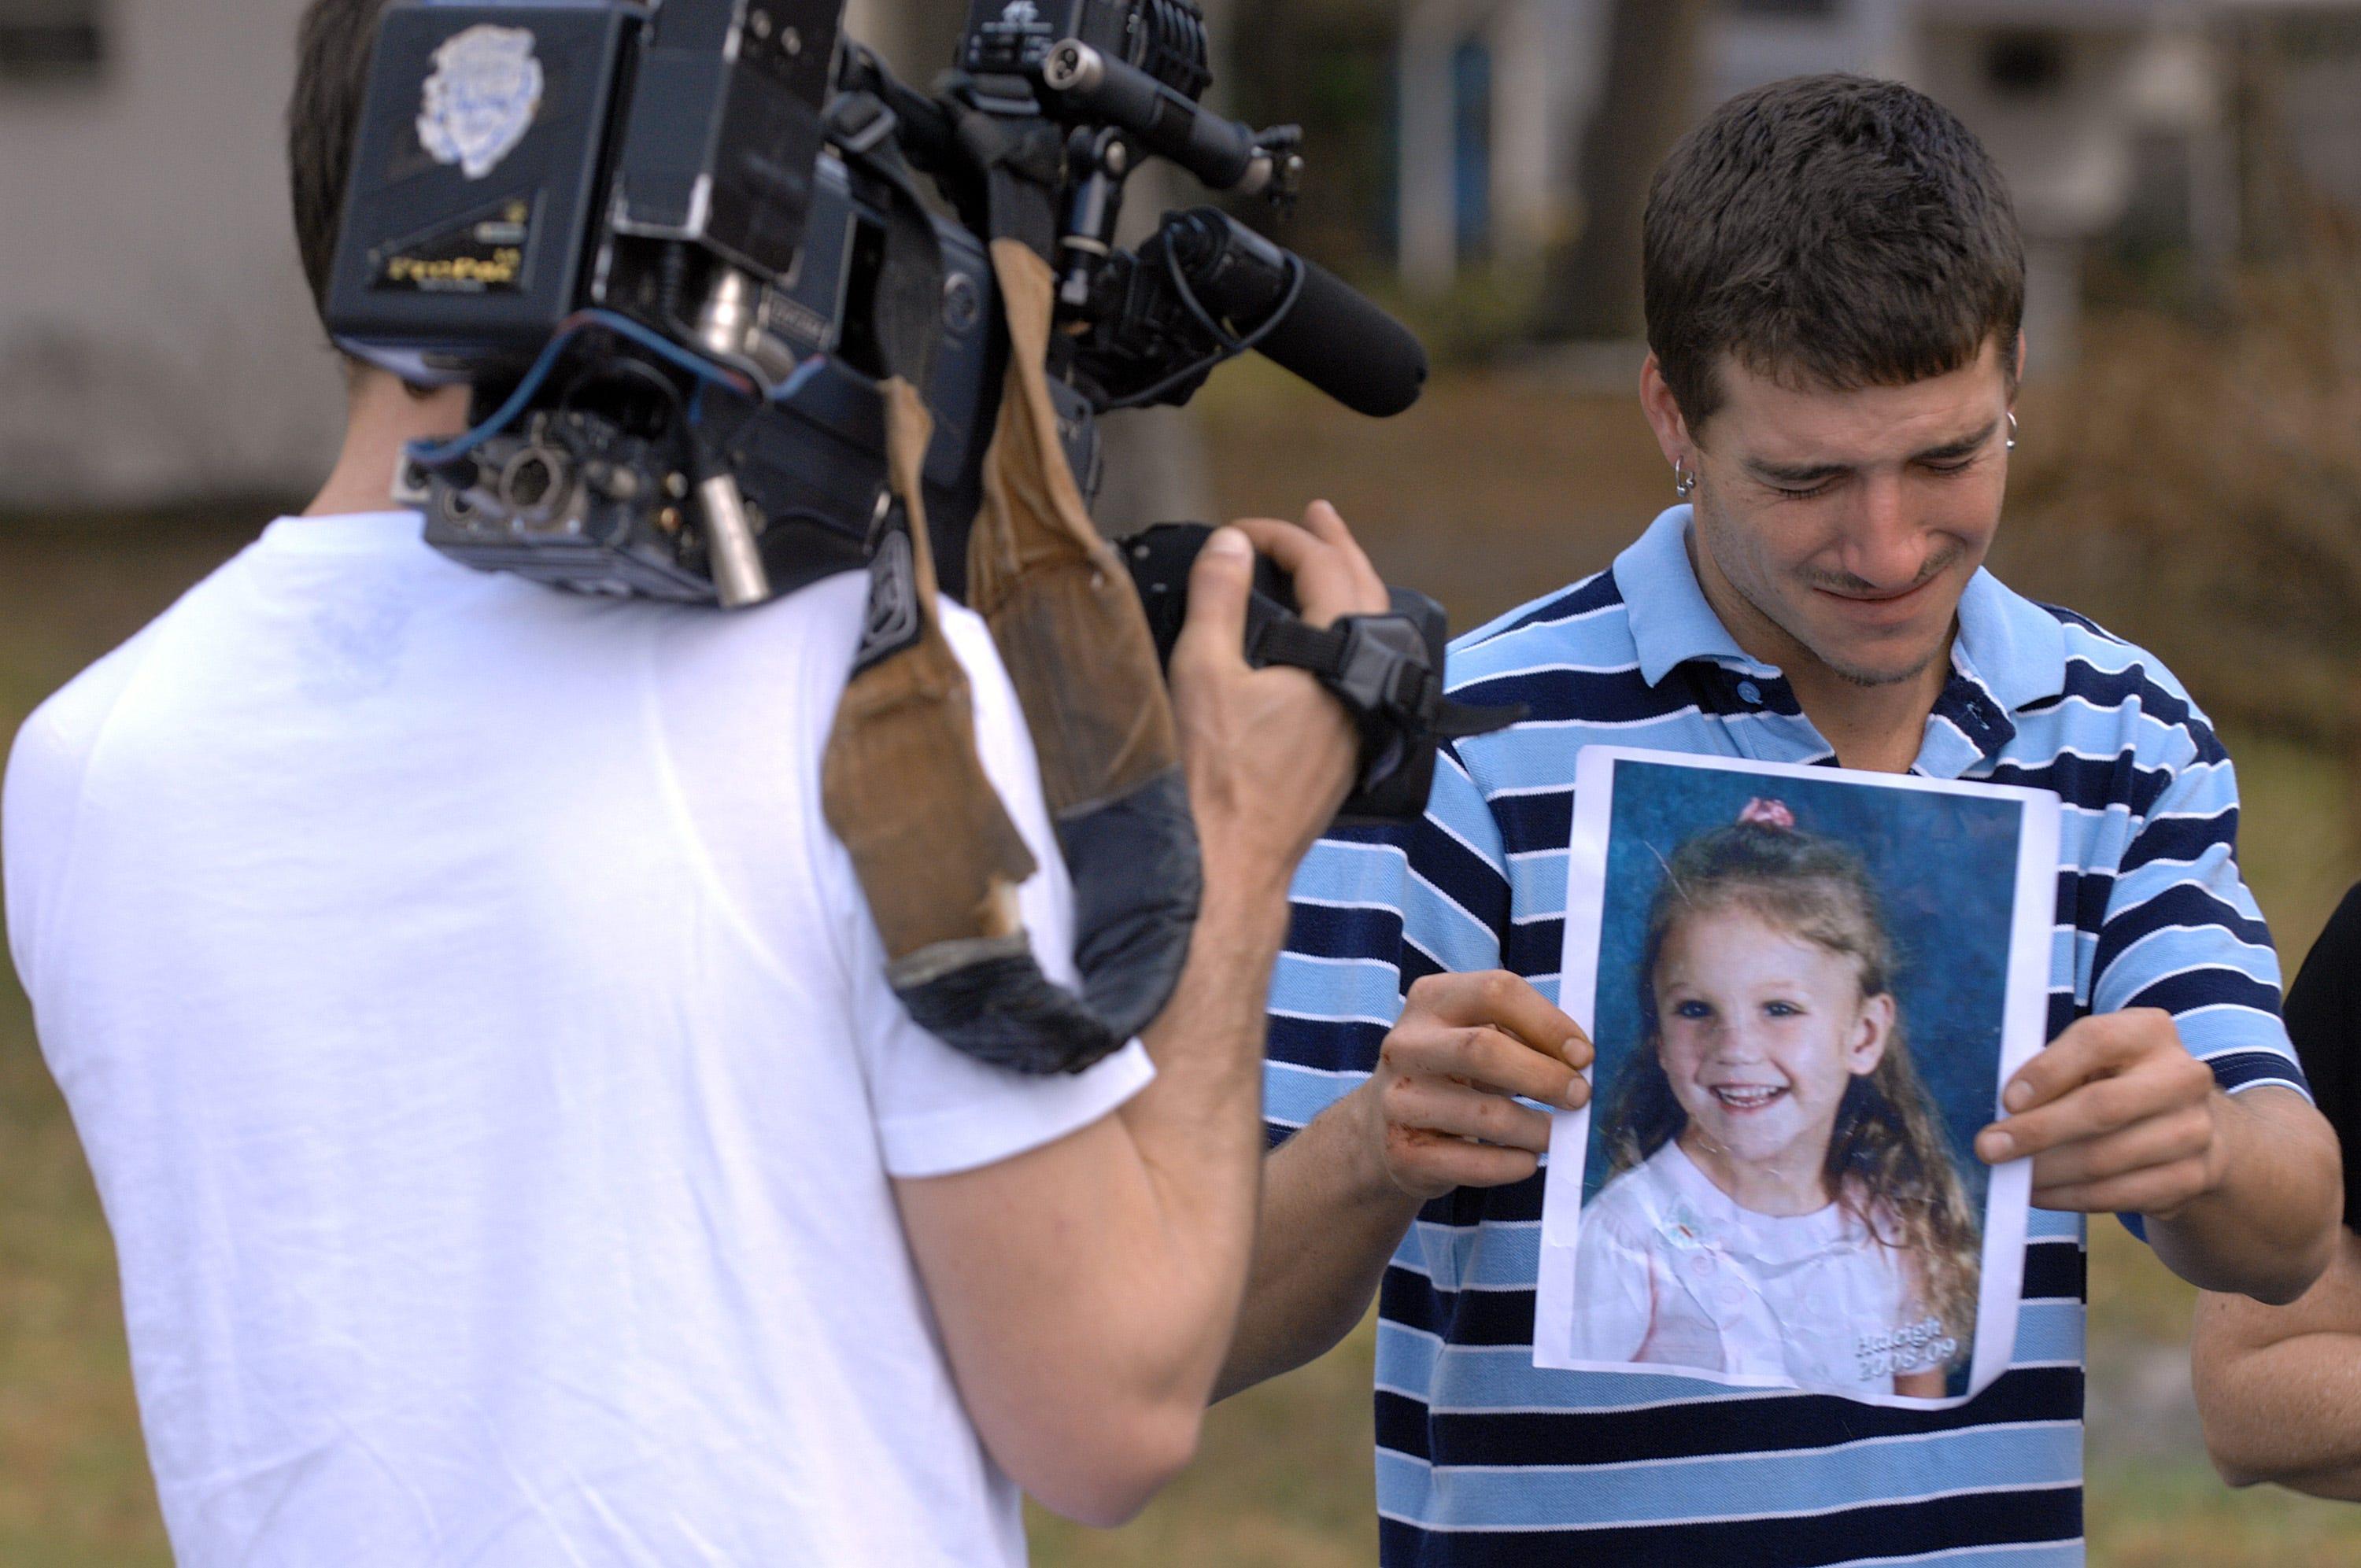 Ronald Cummings, the father of missing Haleigh Cummings, breaks down as he shows a photo of the 5-year-old for a TV videographer on Feb. 10, 2009. After serving 12 years on unrelated drug charges, Cummings was arrested again on Christmas Day.